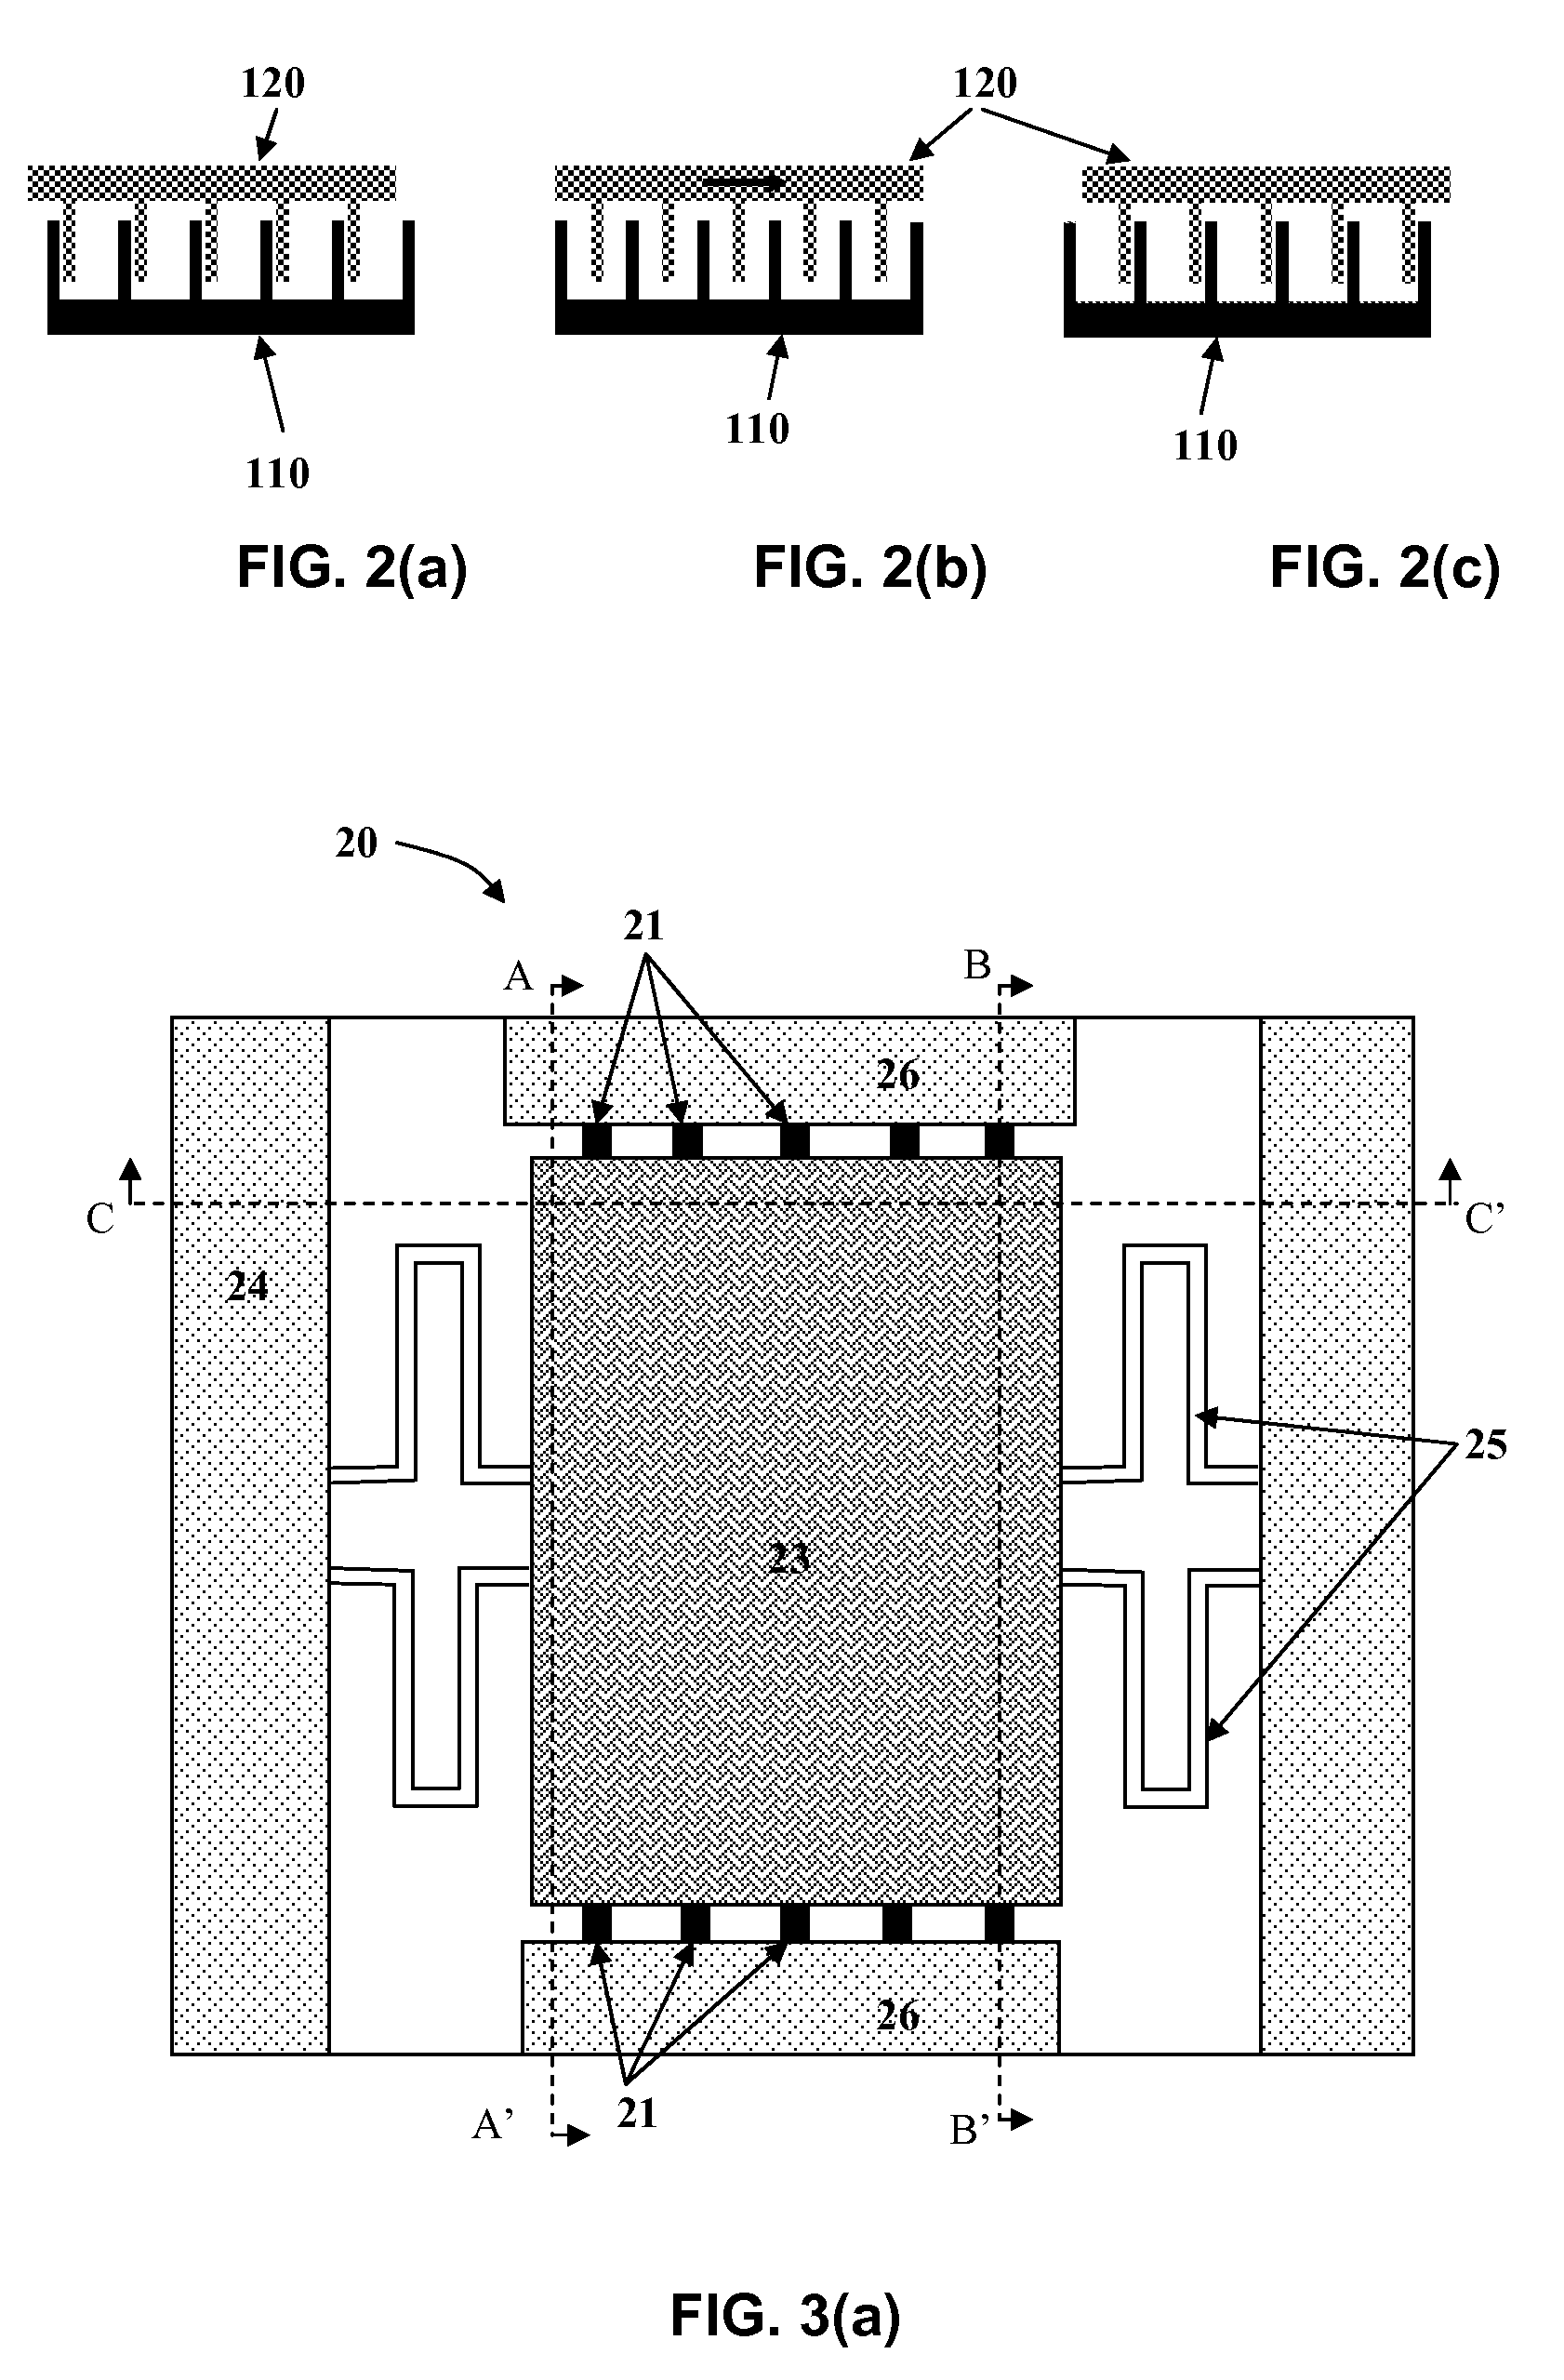 Microstructure with enlarged mass and electrode area for kinetic to electrical energy conversion